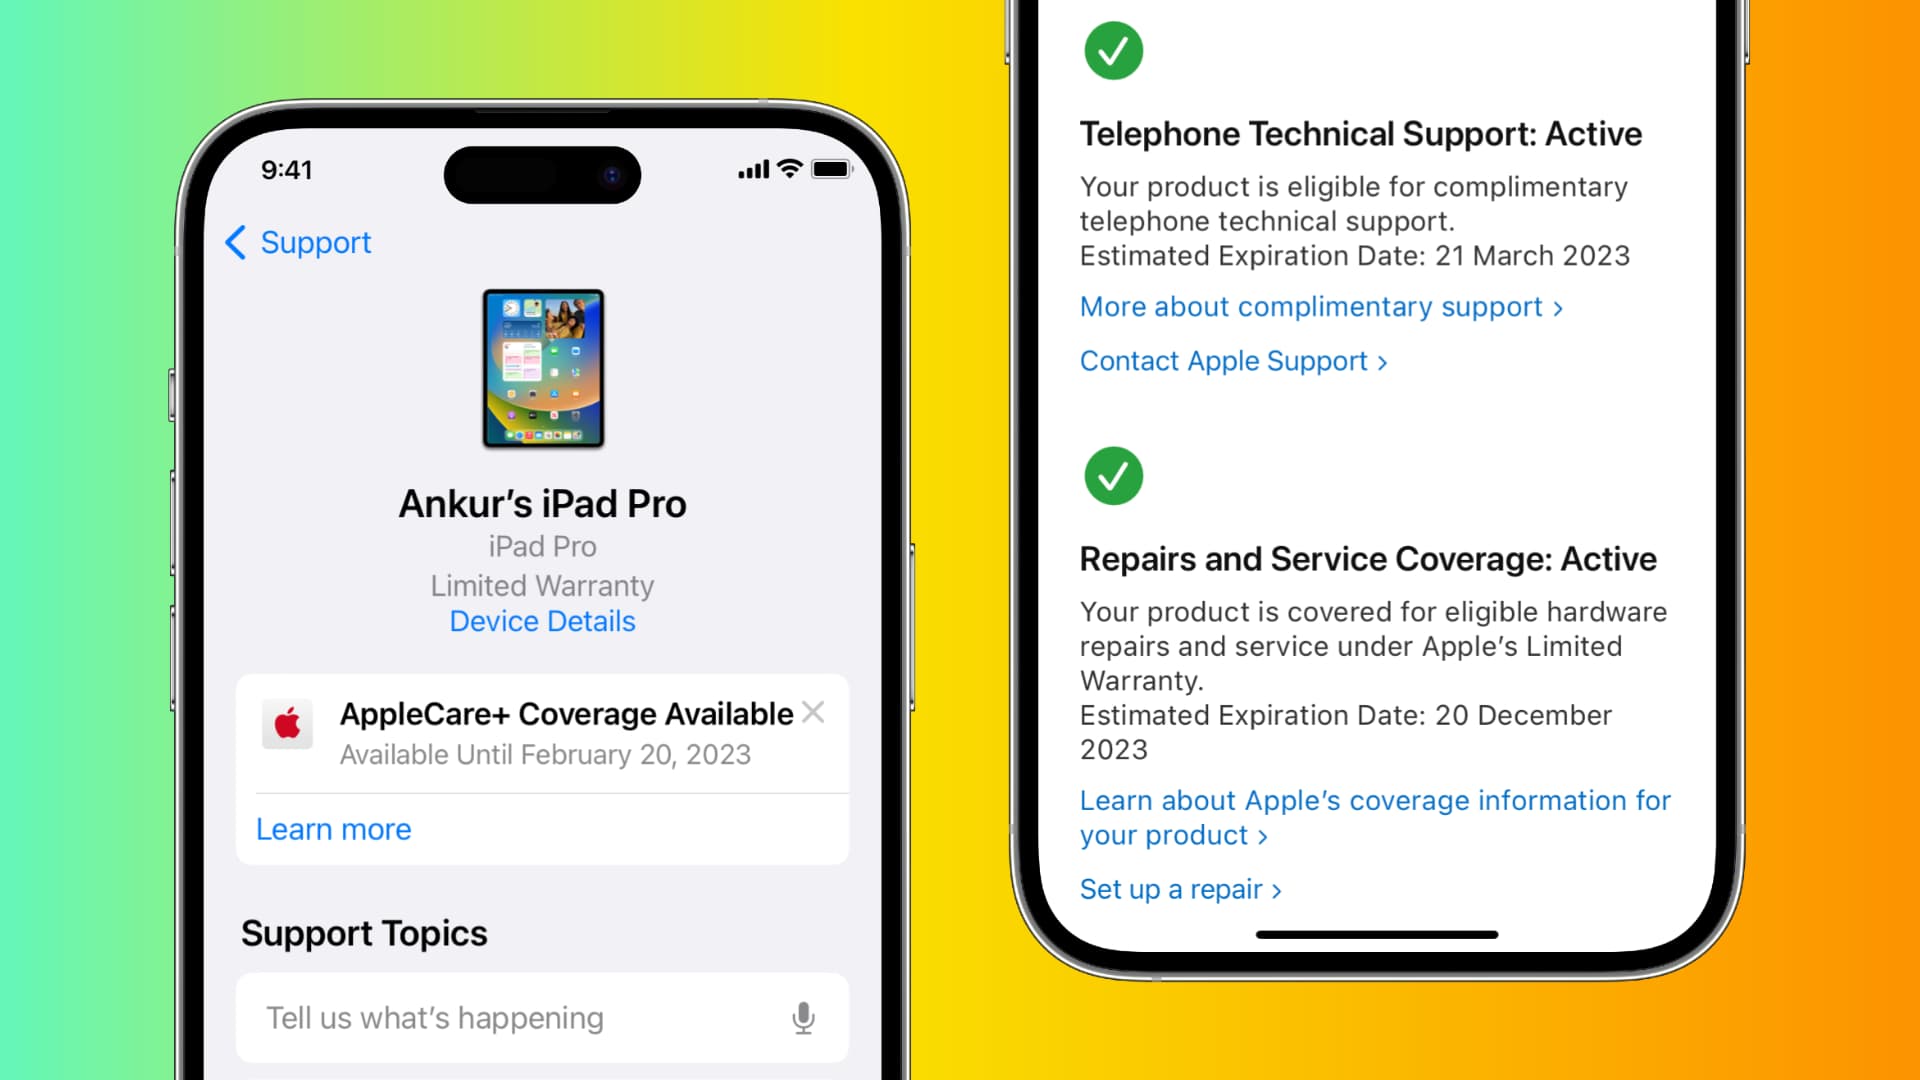 How to check the warranty status of your iPhone, iPad, Mac, Apple Watch, AirPods, and any other Apple device